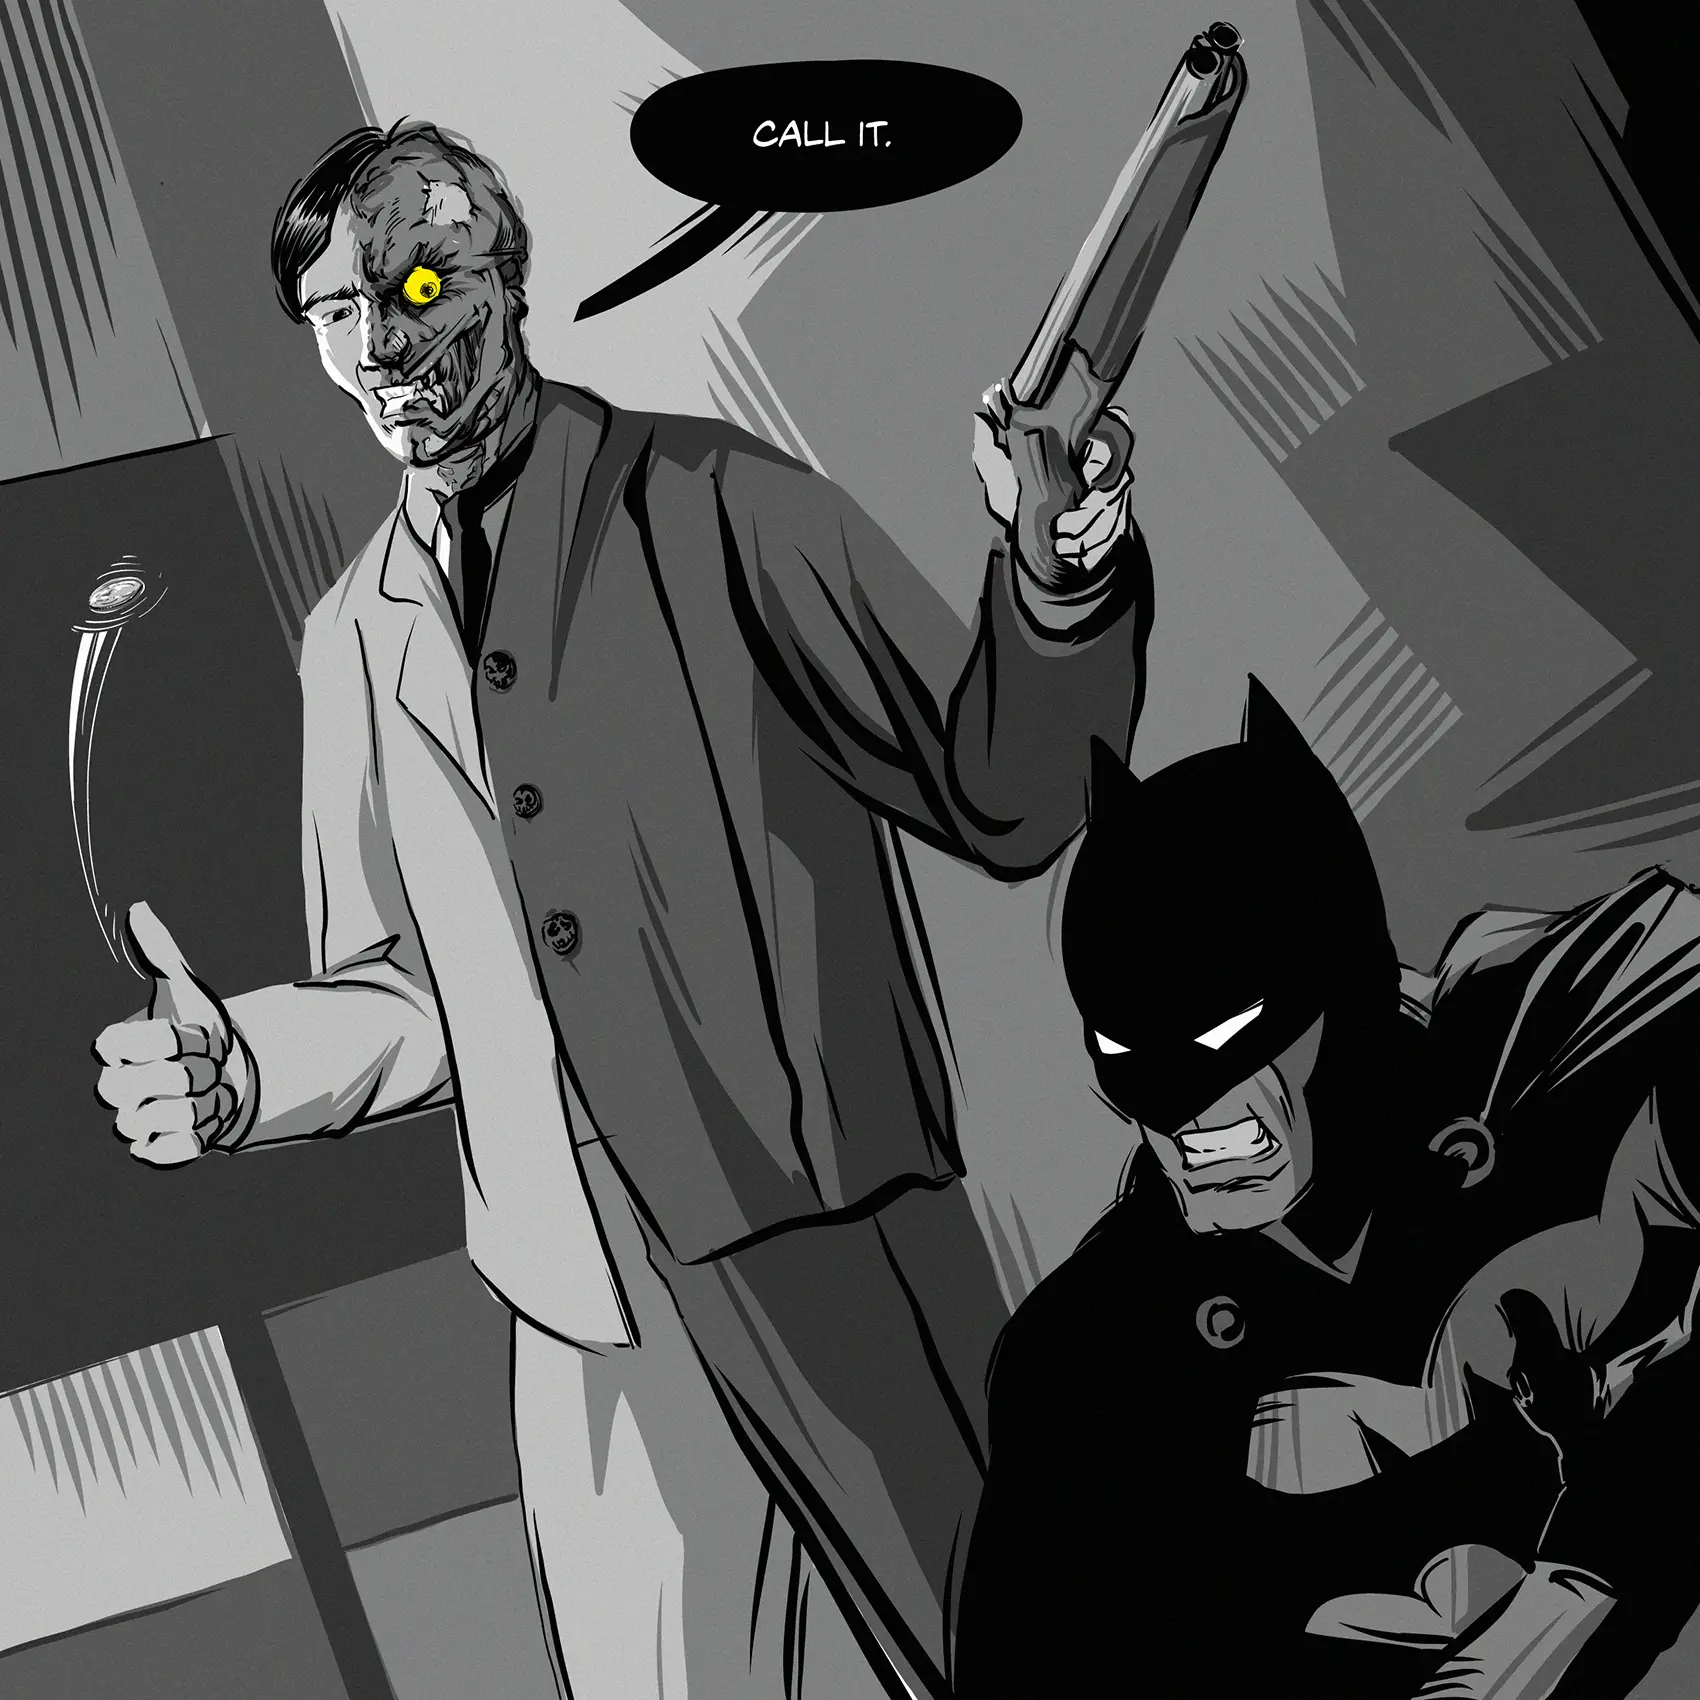 Two-Face threatens a wounded Batman.